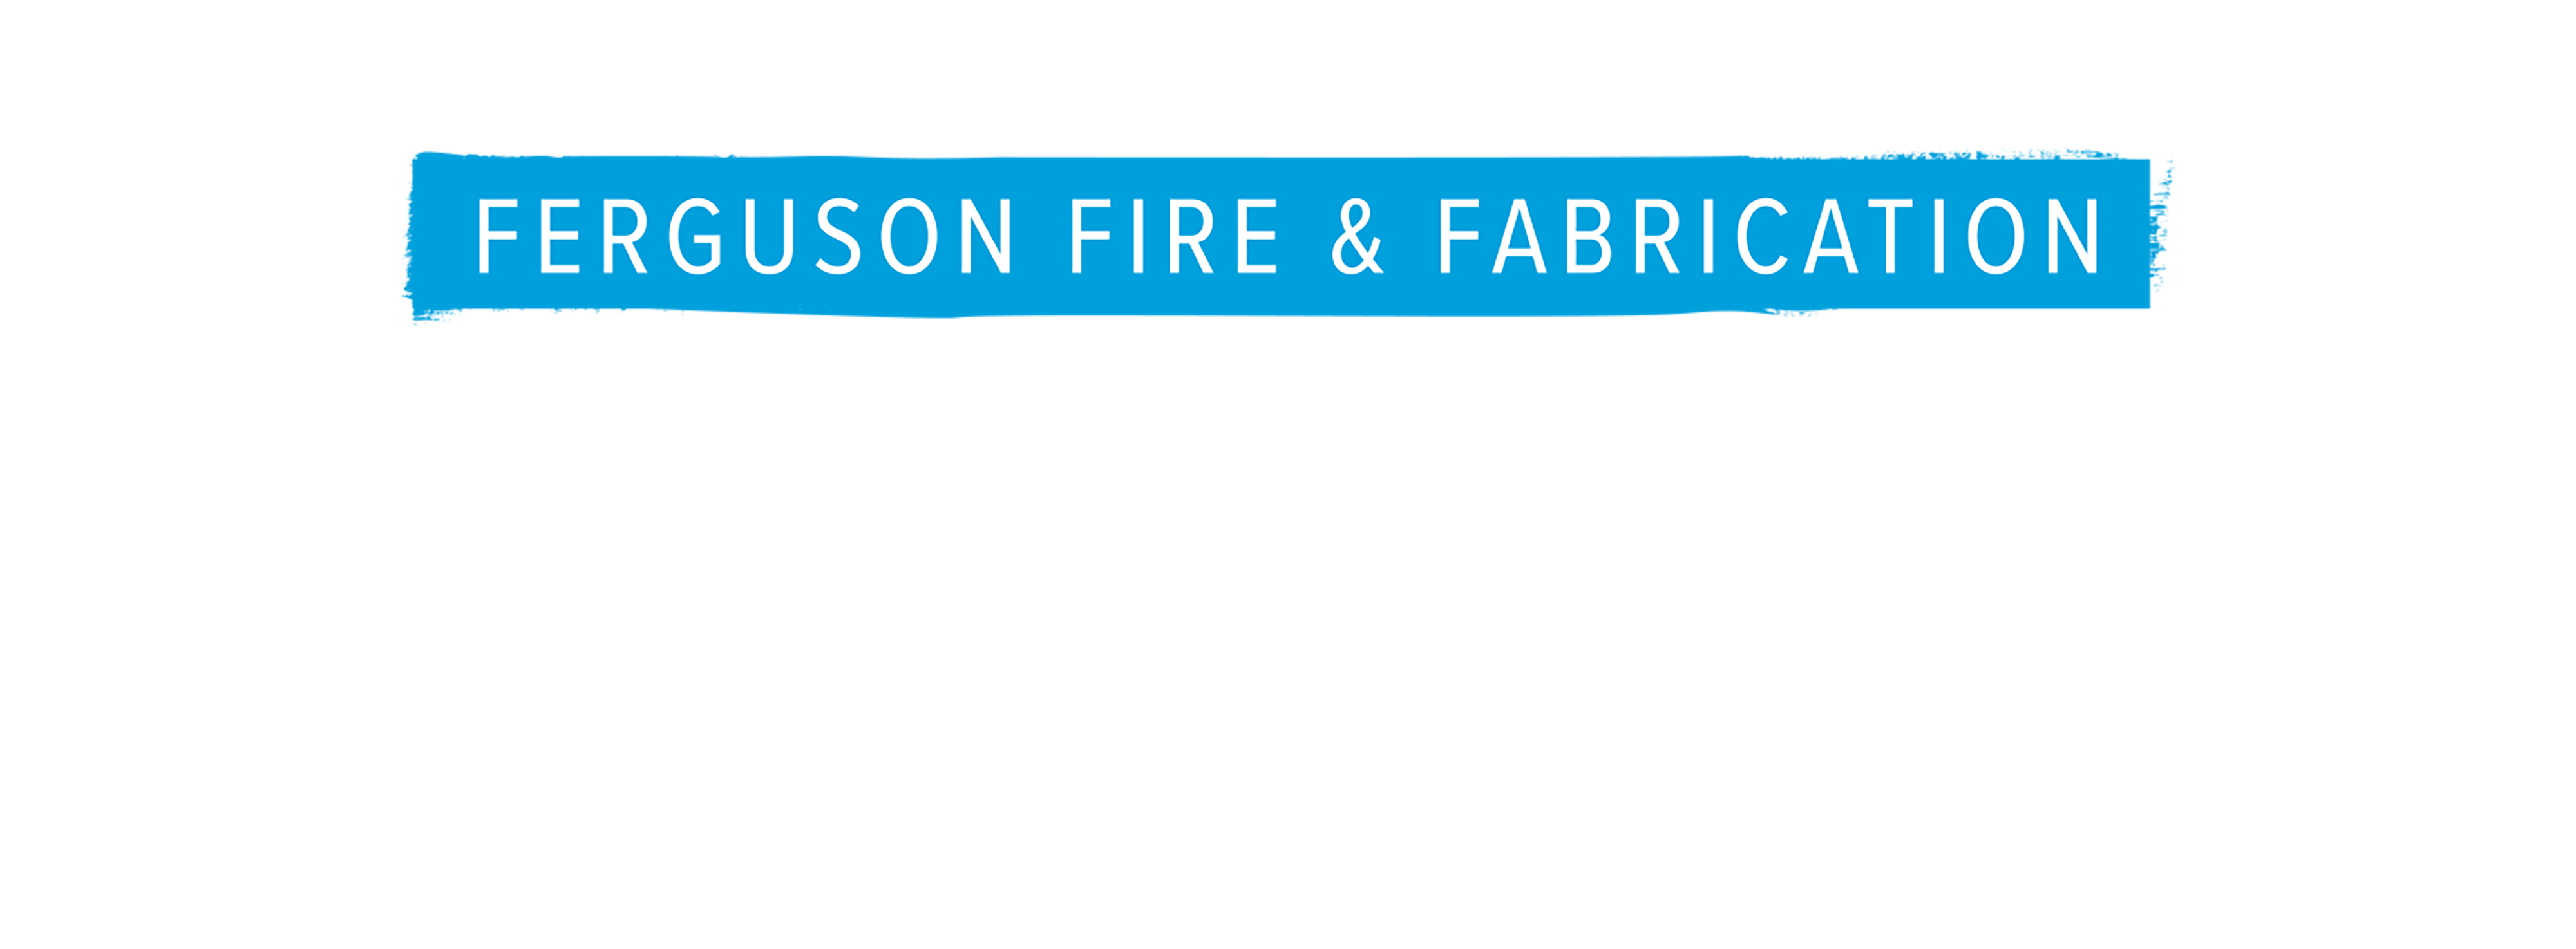 Ferguson Fire & Fabrication Trade Pro Tour in styled text.